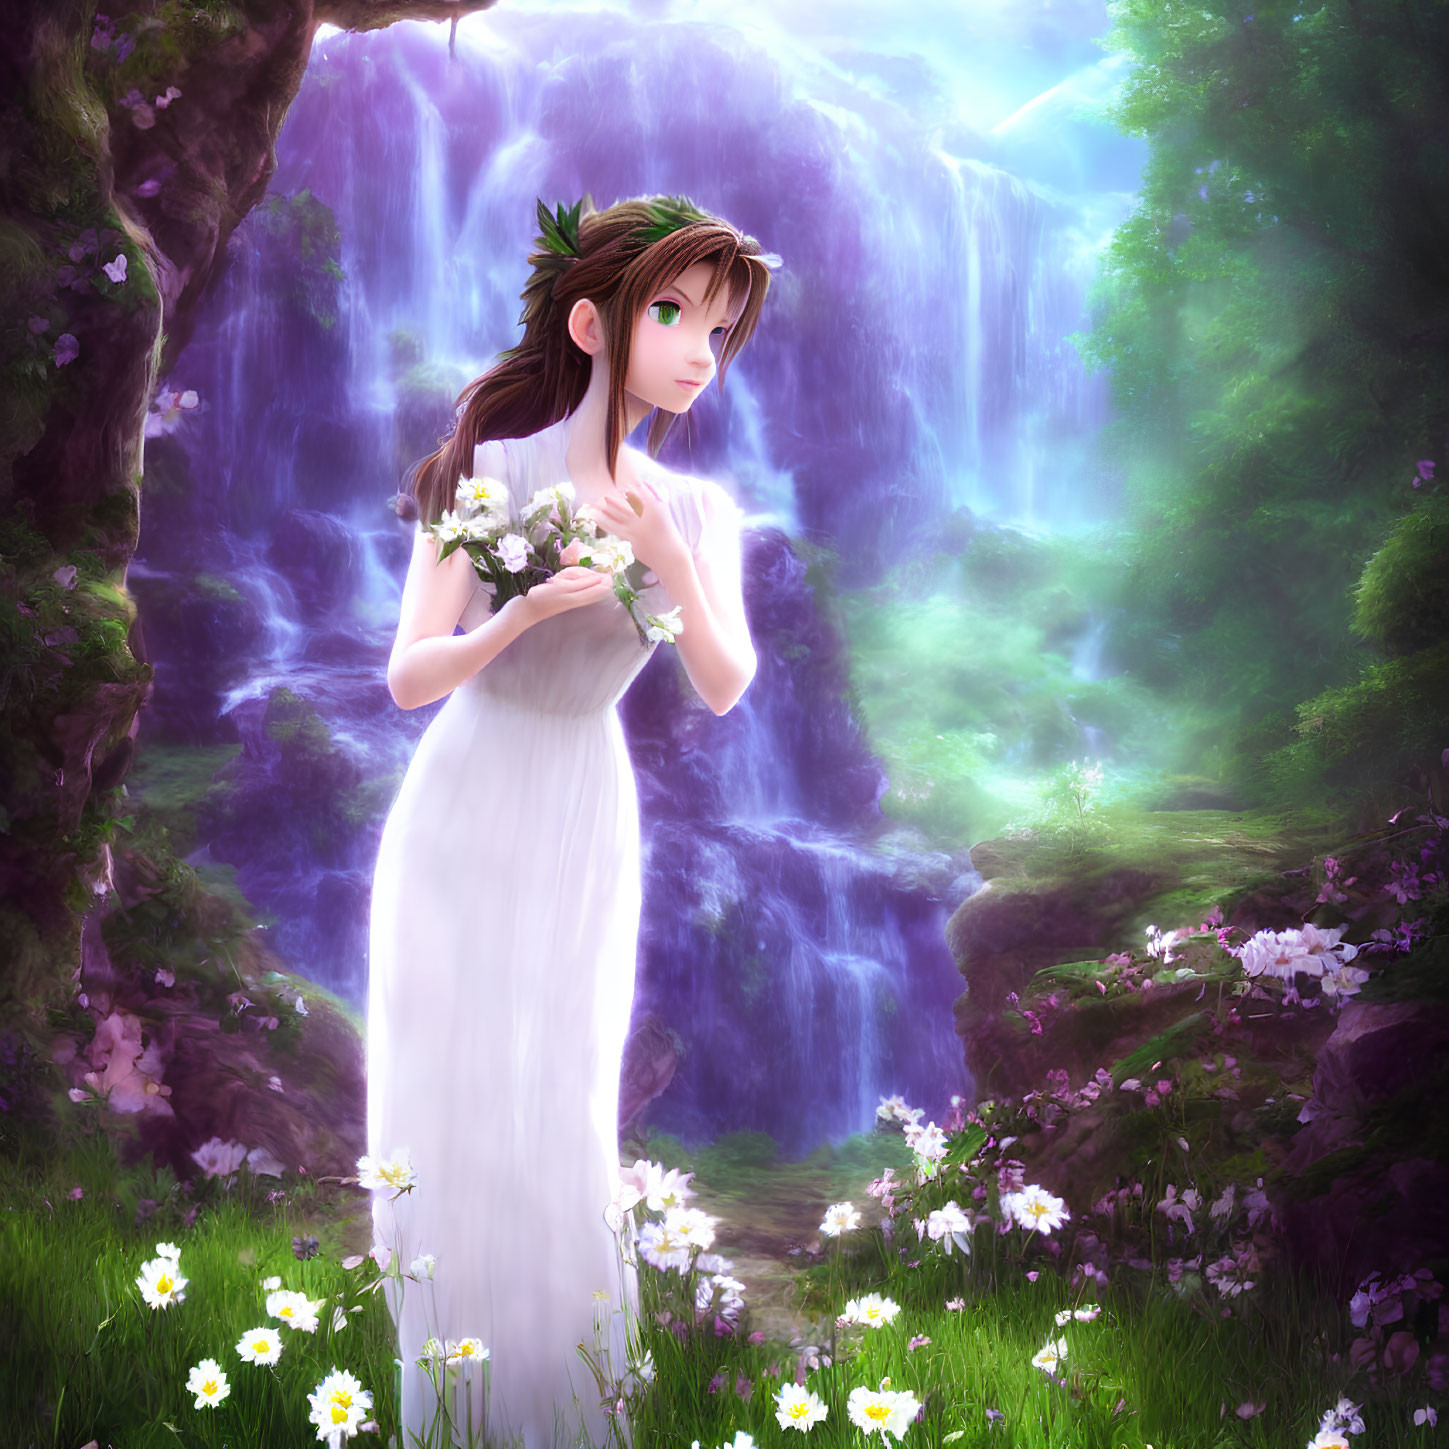 Illustration of Woman by Waterfall with Flowers